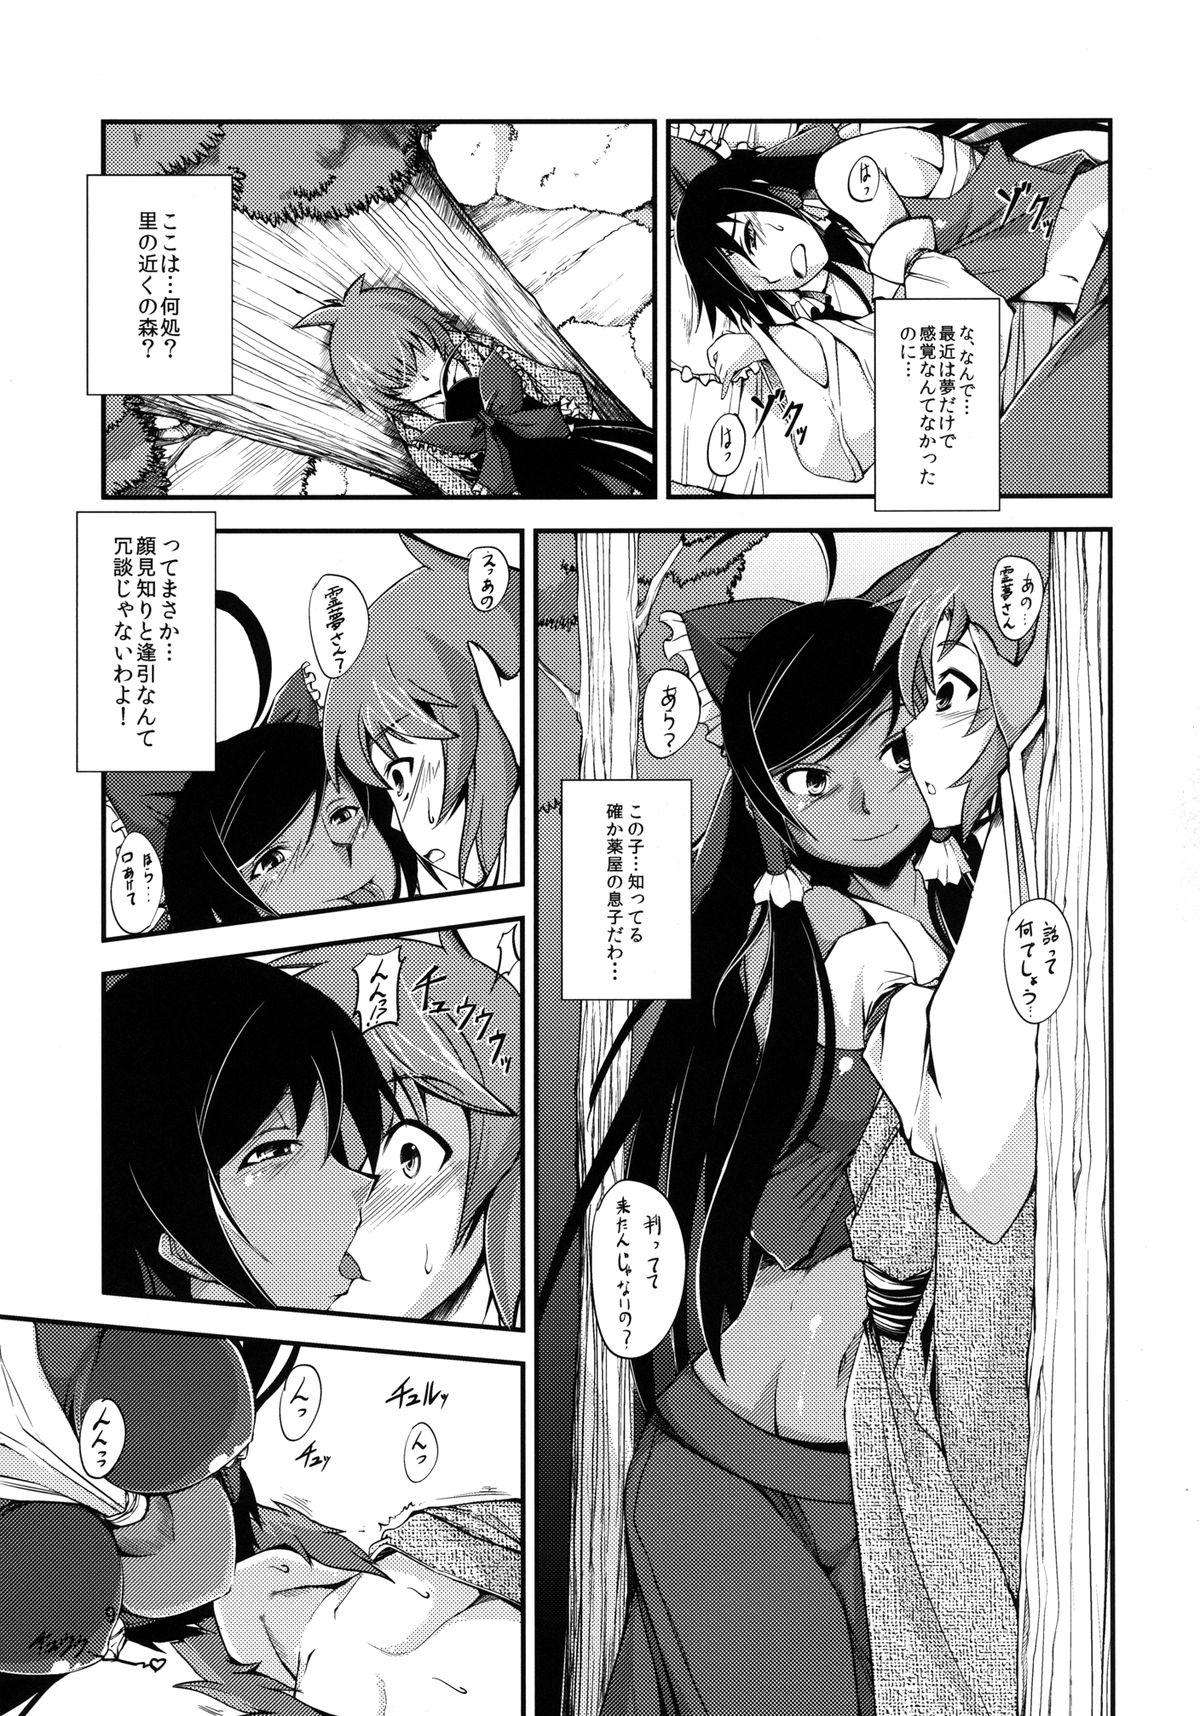 Strap On Kuro Miko no Hen - Touhou project Pounded - Page 9